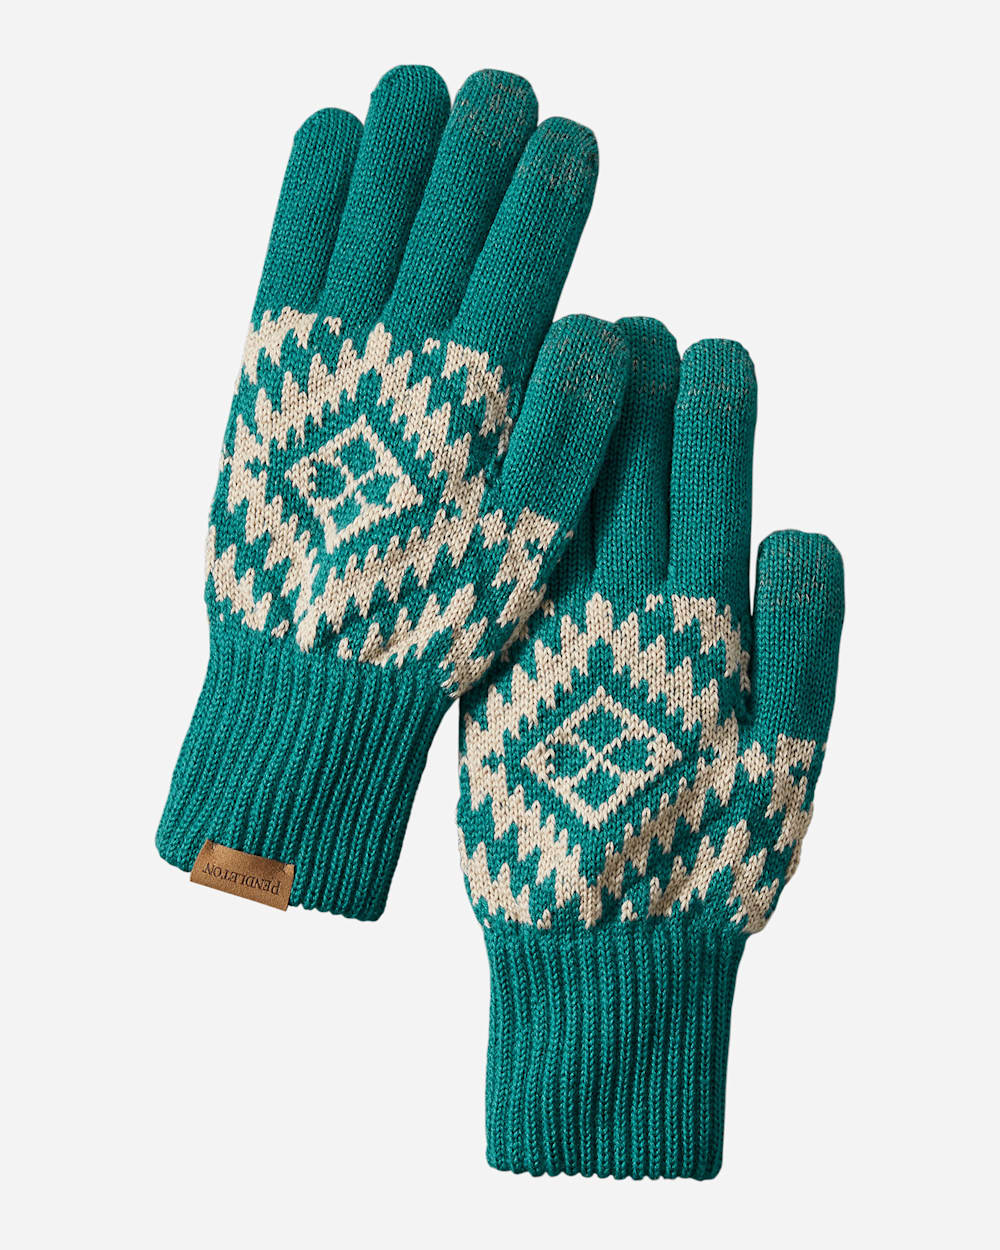 JACQUARD TEXTING GLOVES IN JOURNEY WEST TURQUOISE image number 1